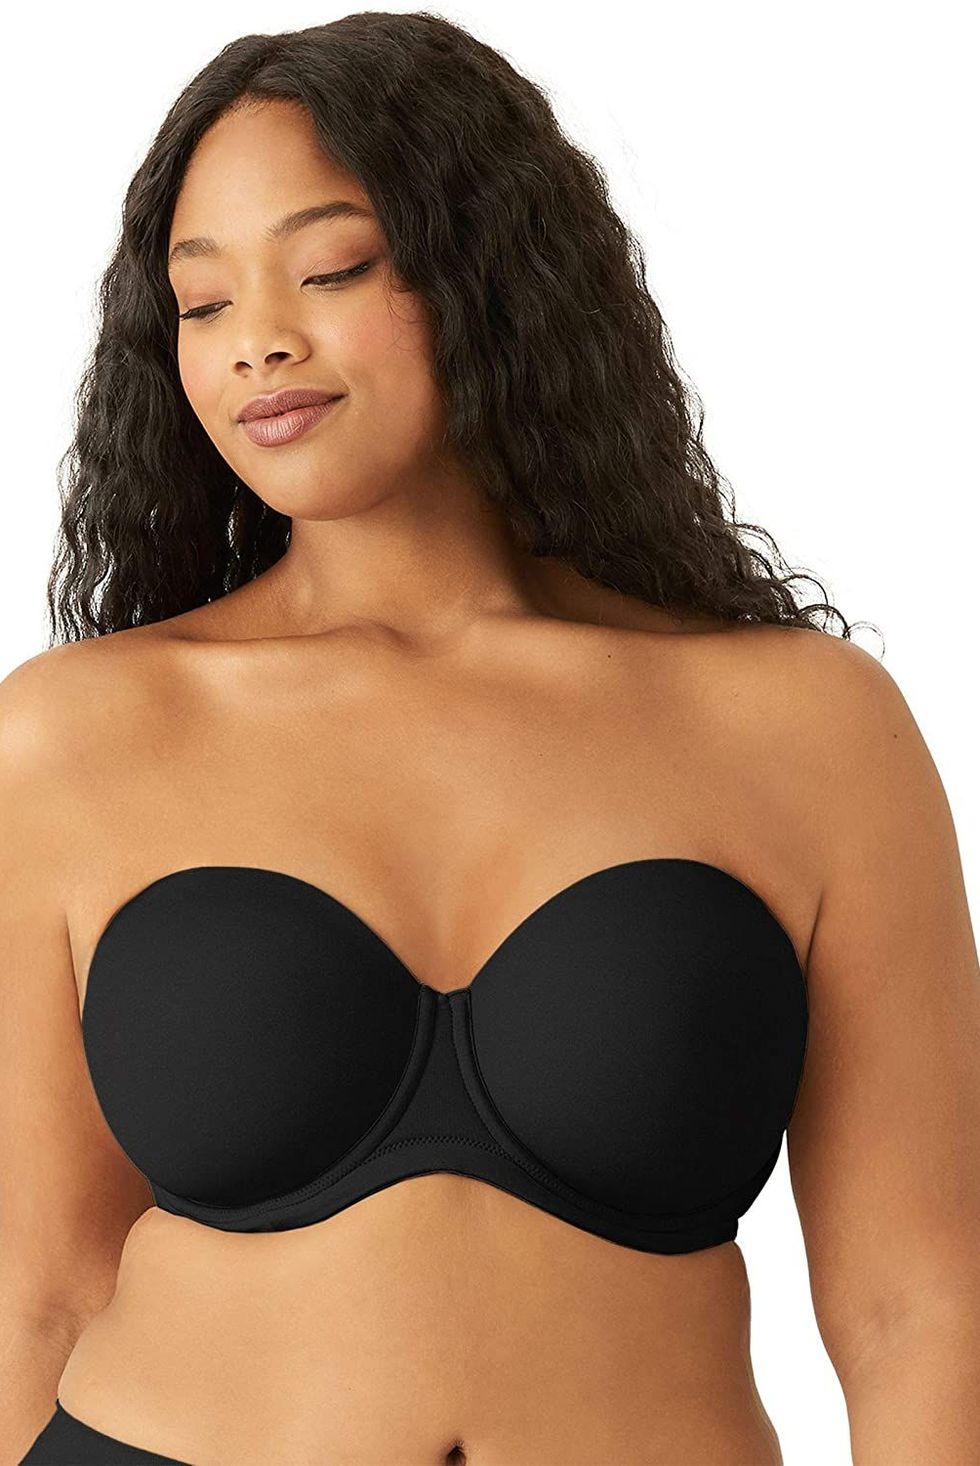 I'm Ditching My Strapless Bras for These 18 Well-Reviewed